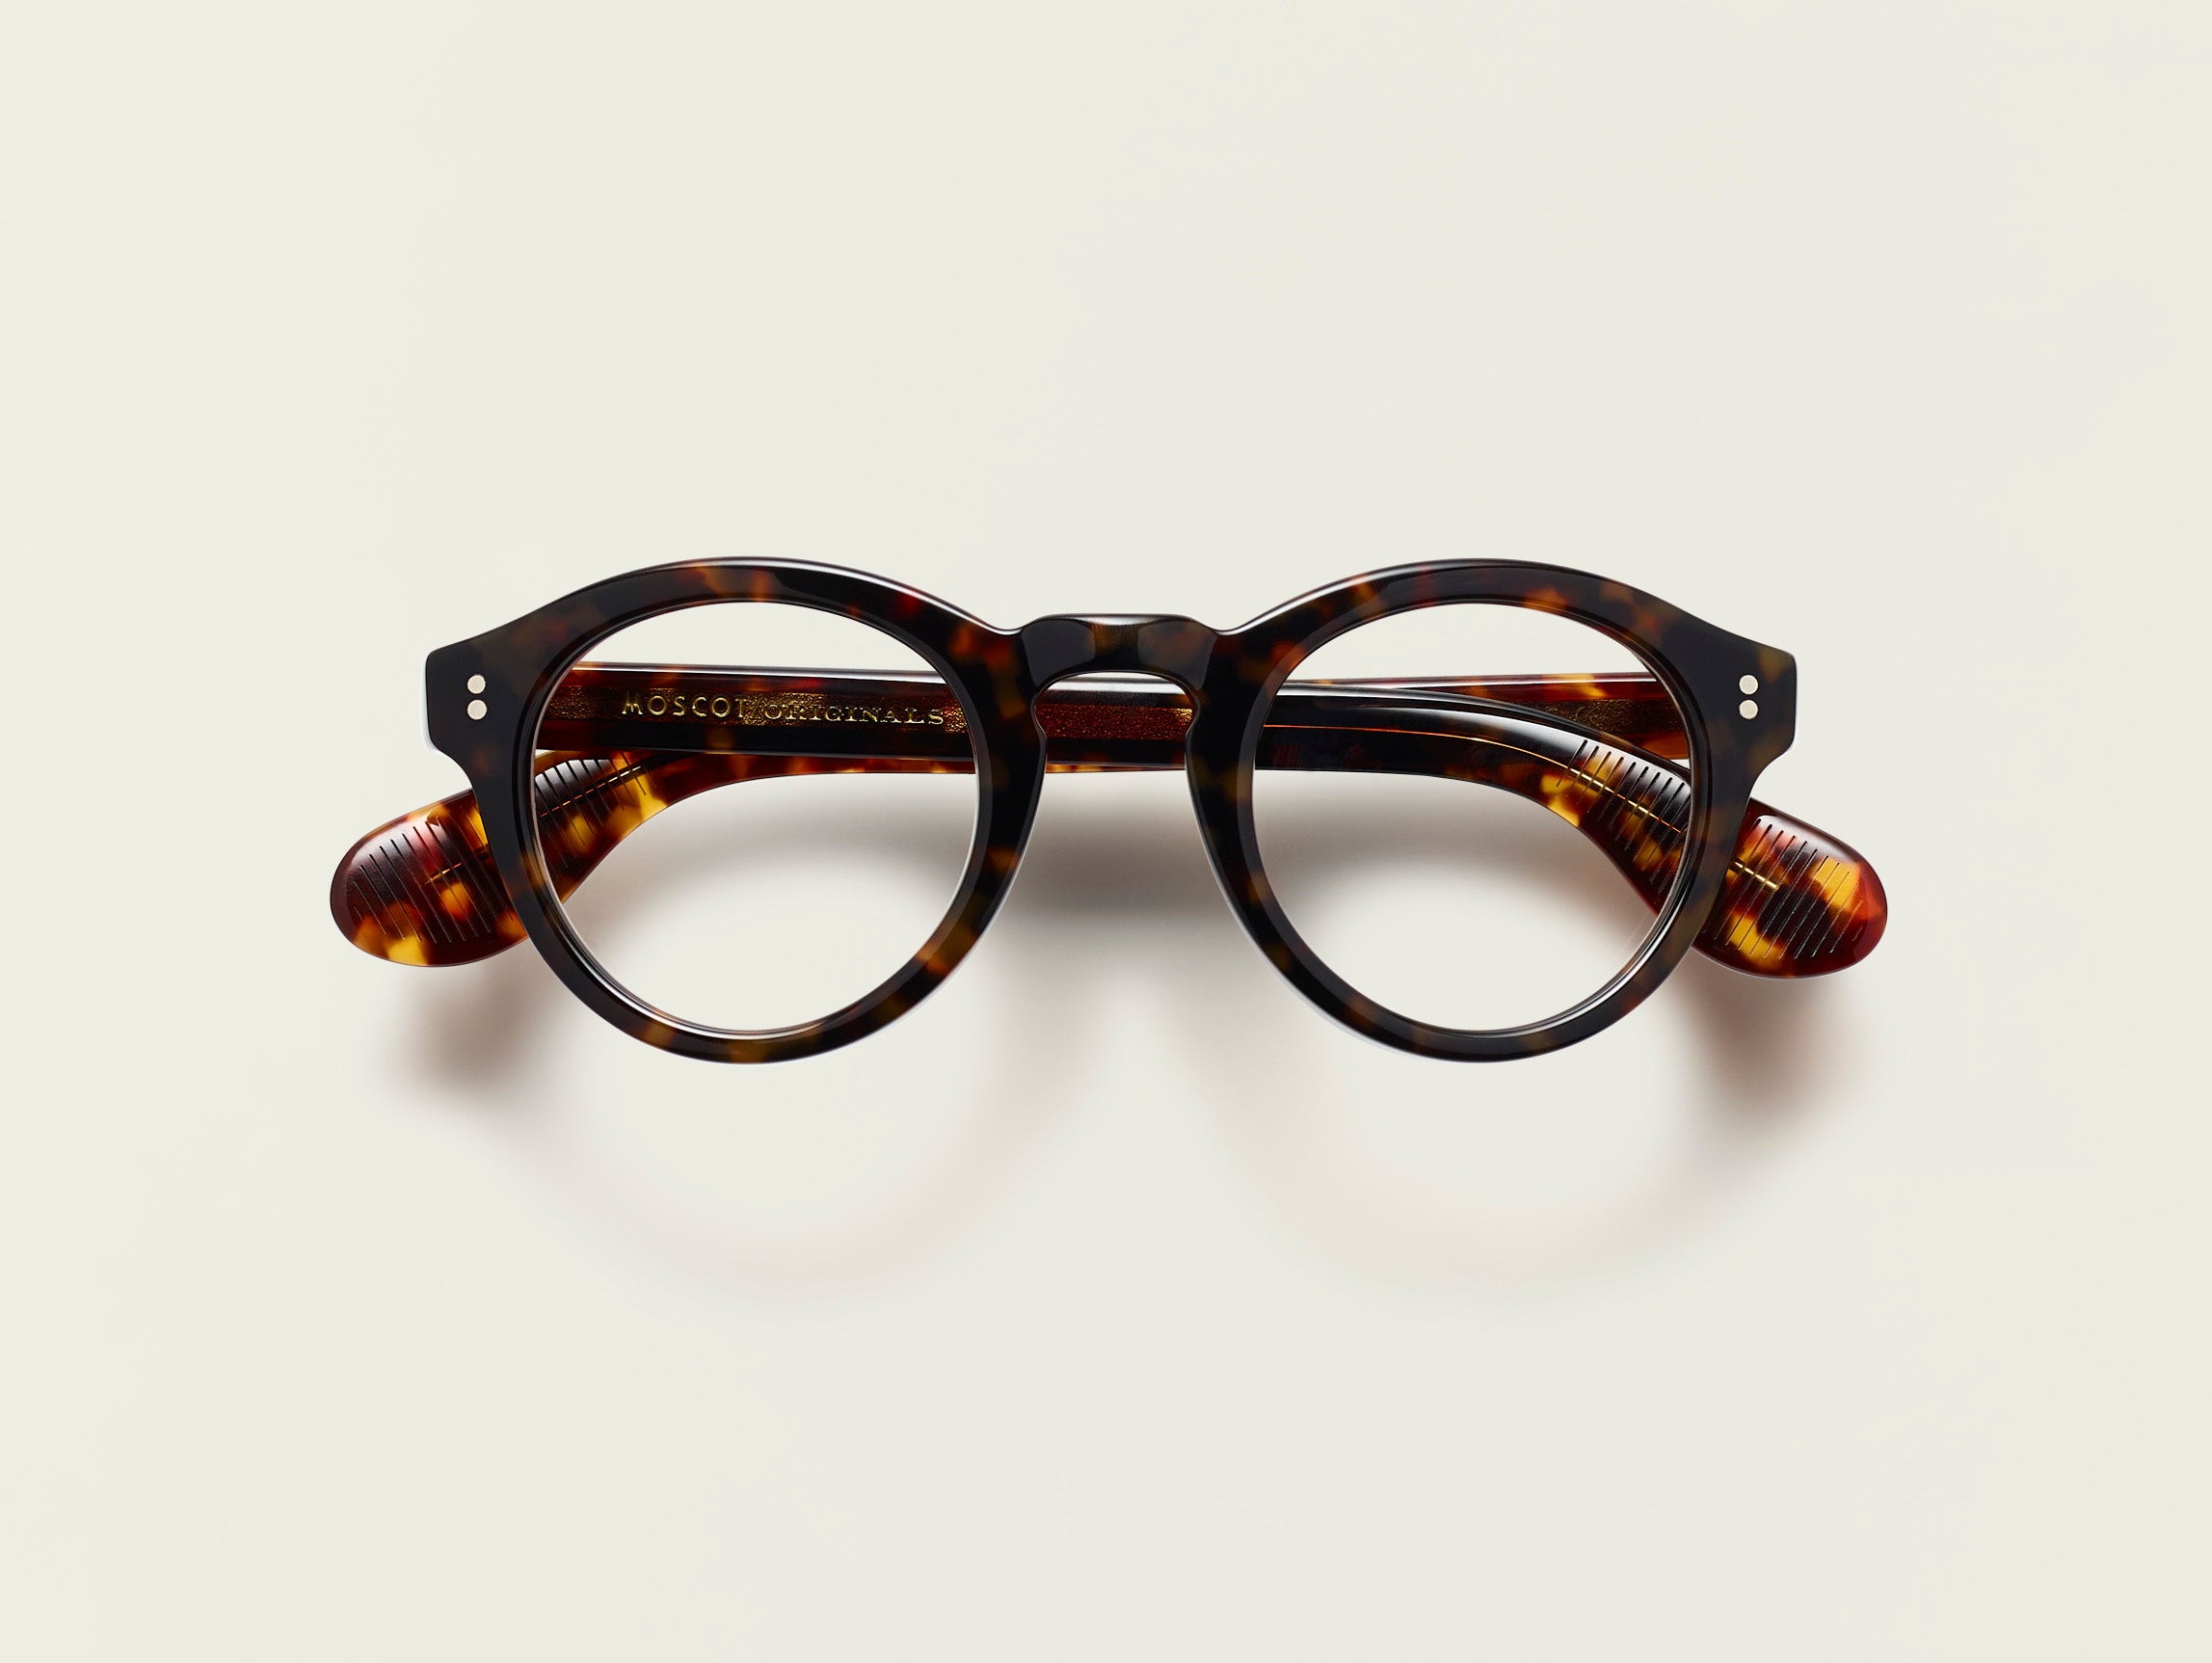 The KEPPE in Tortoise